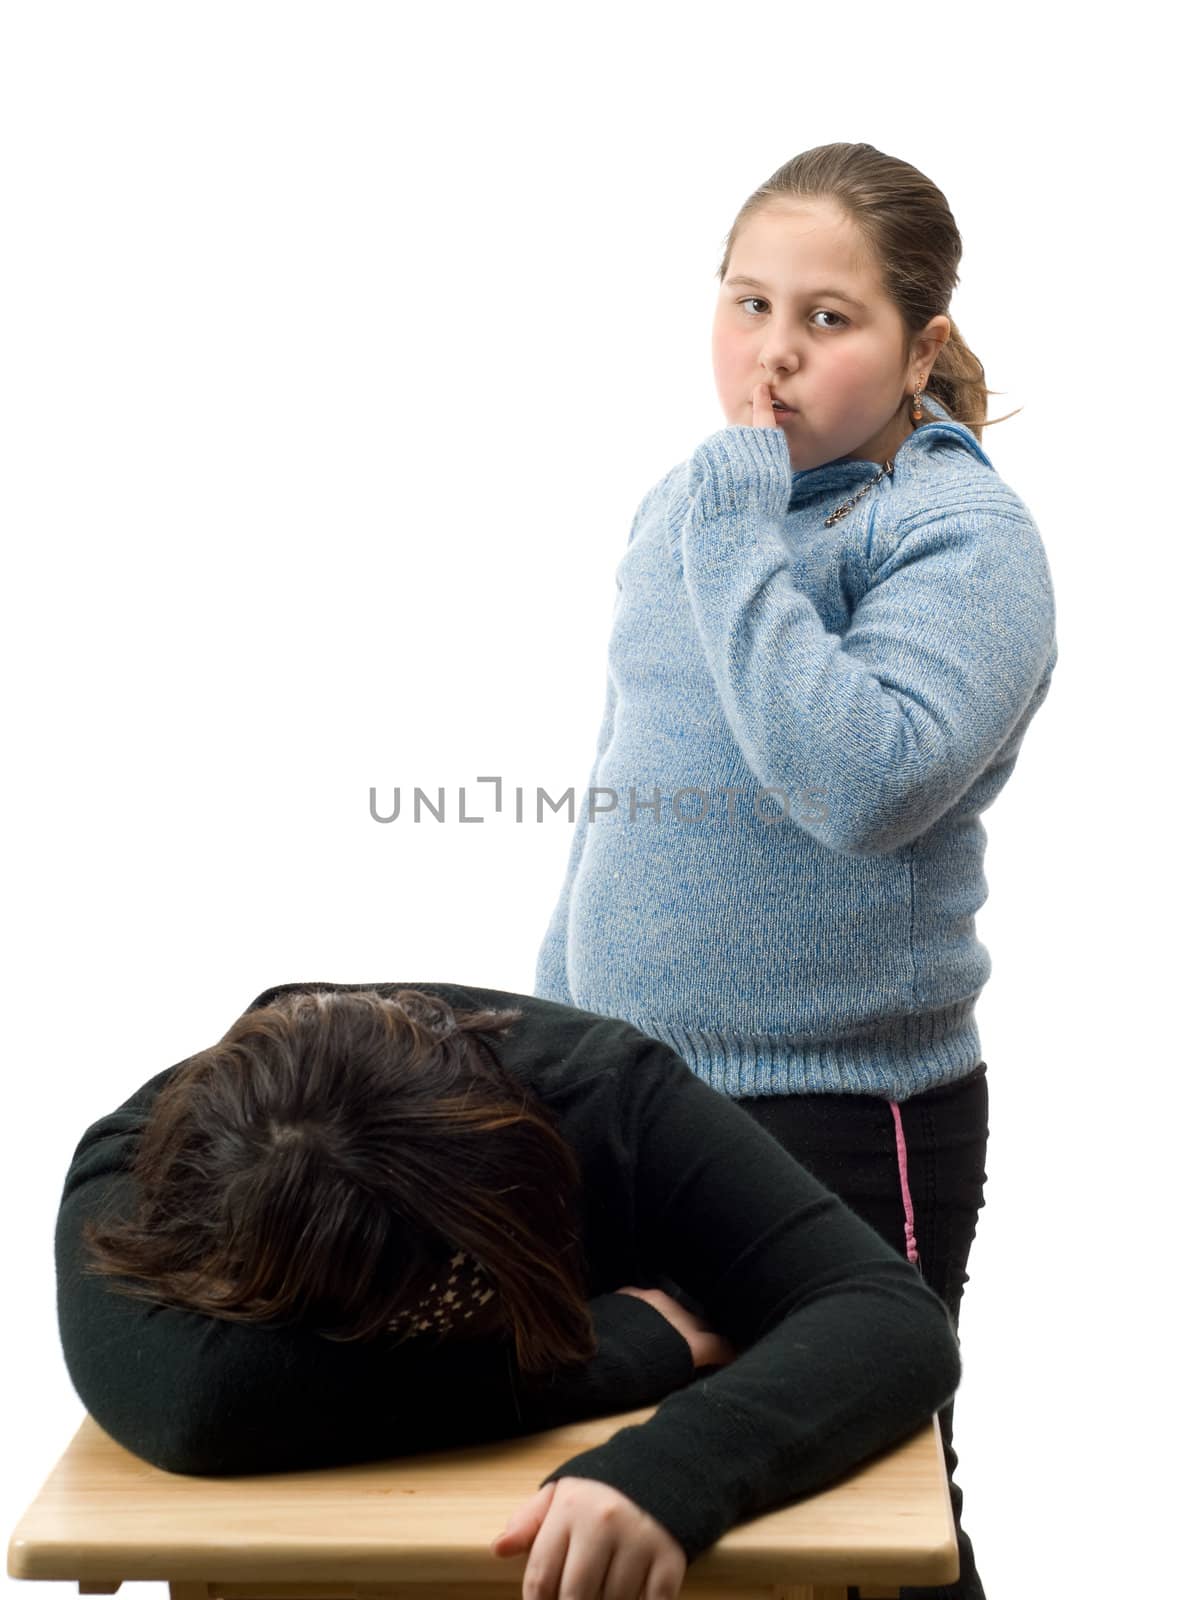 A young girl sneaking up on a friend while she is sleeping at a desk, isolated against a white background